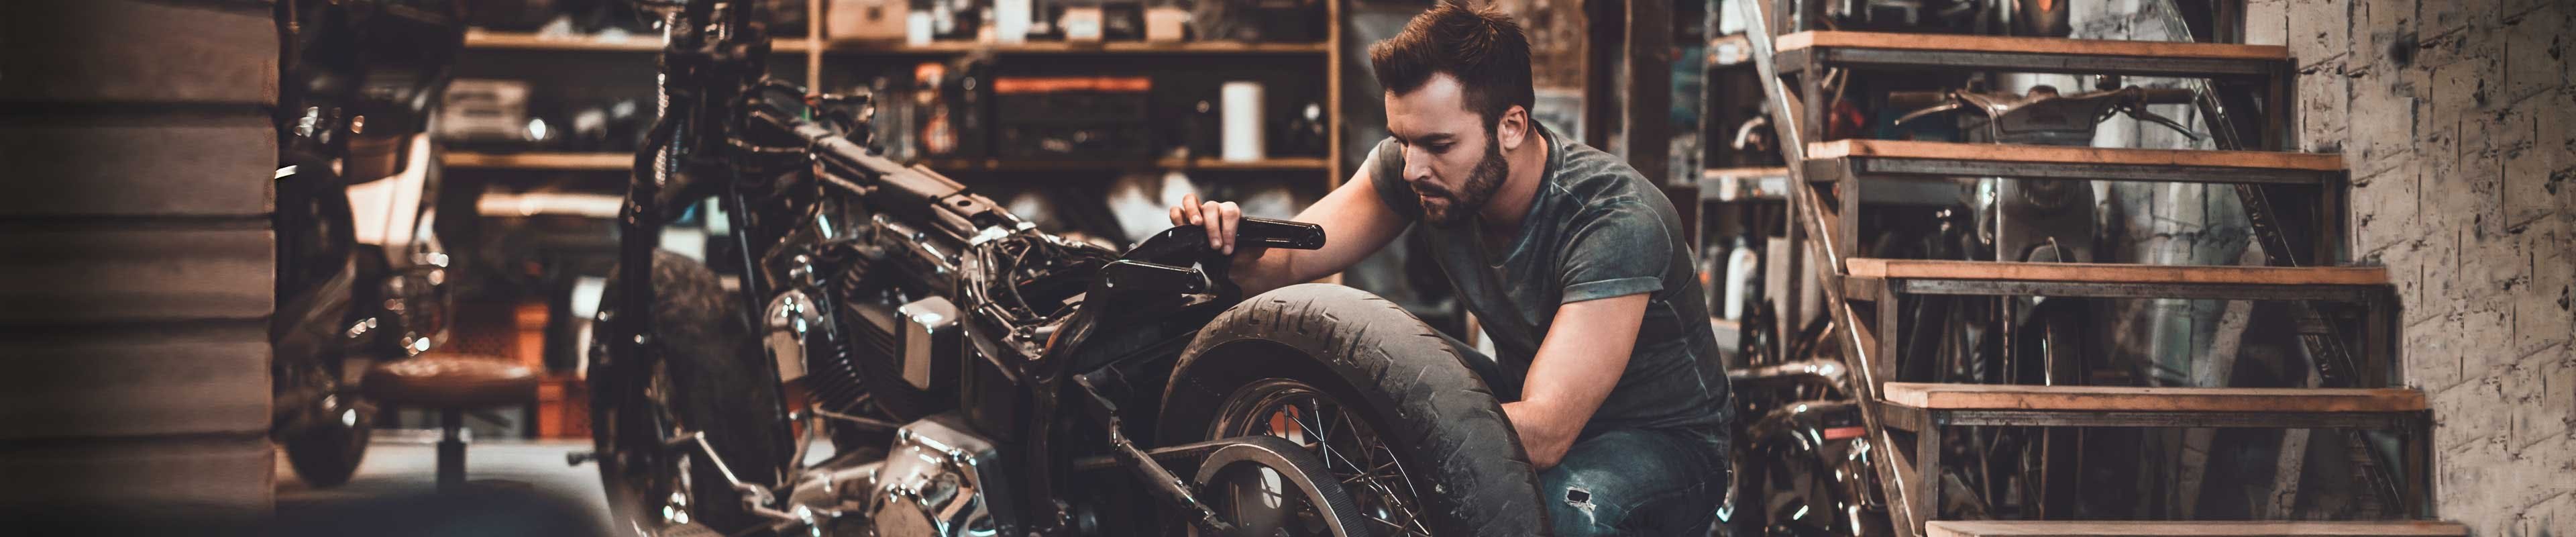 Man working on his motorcycle